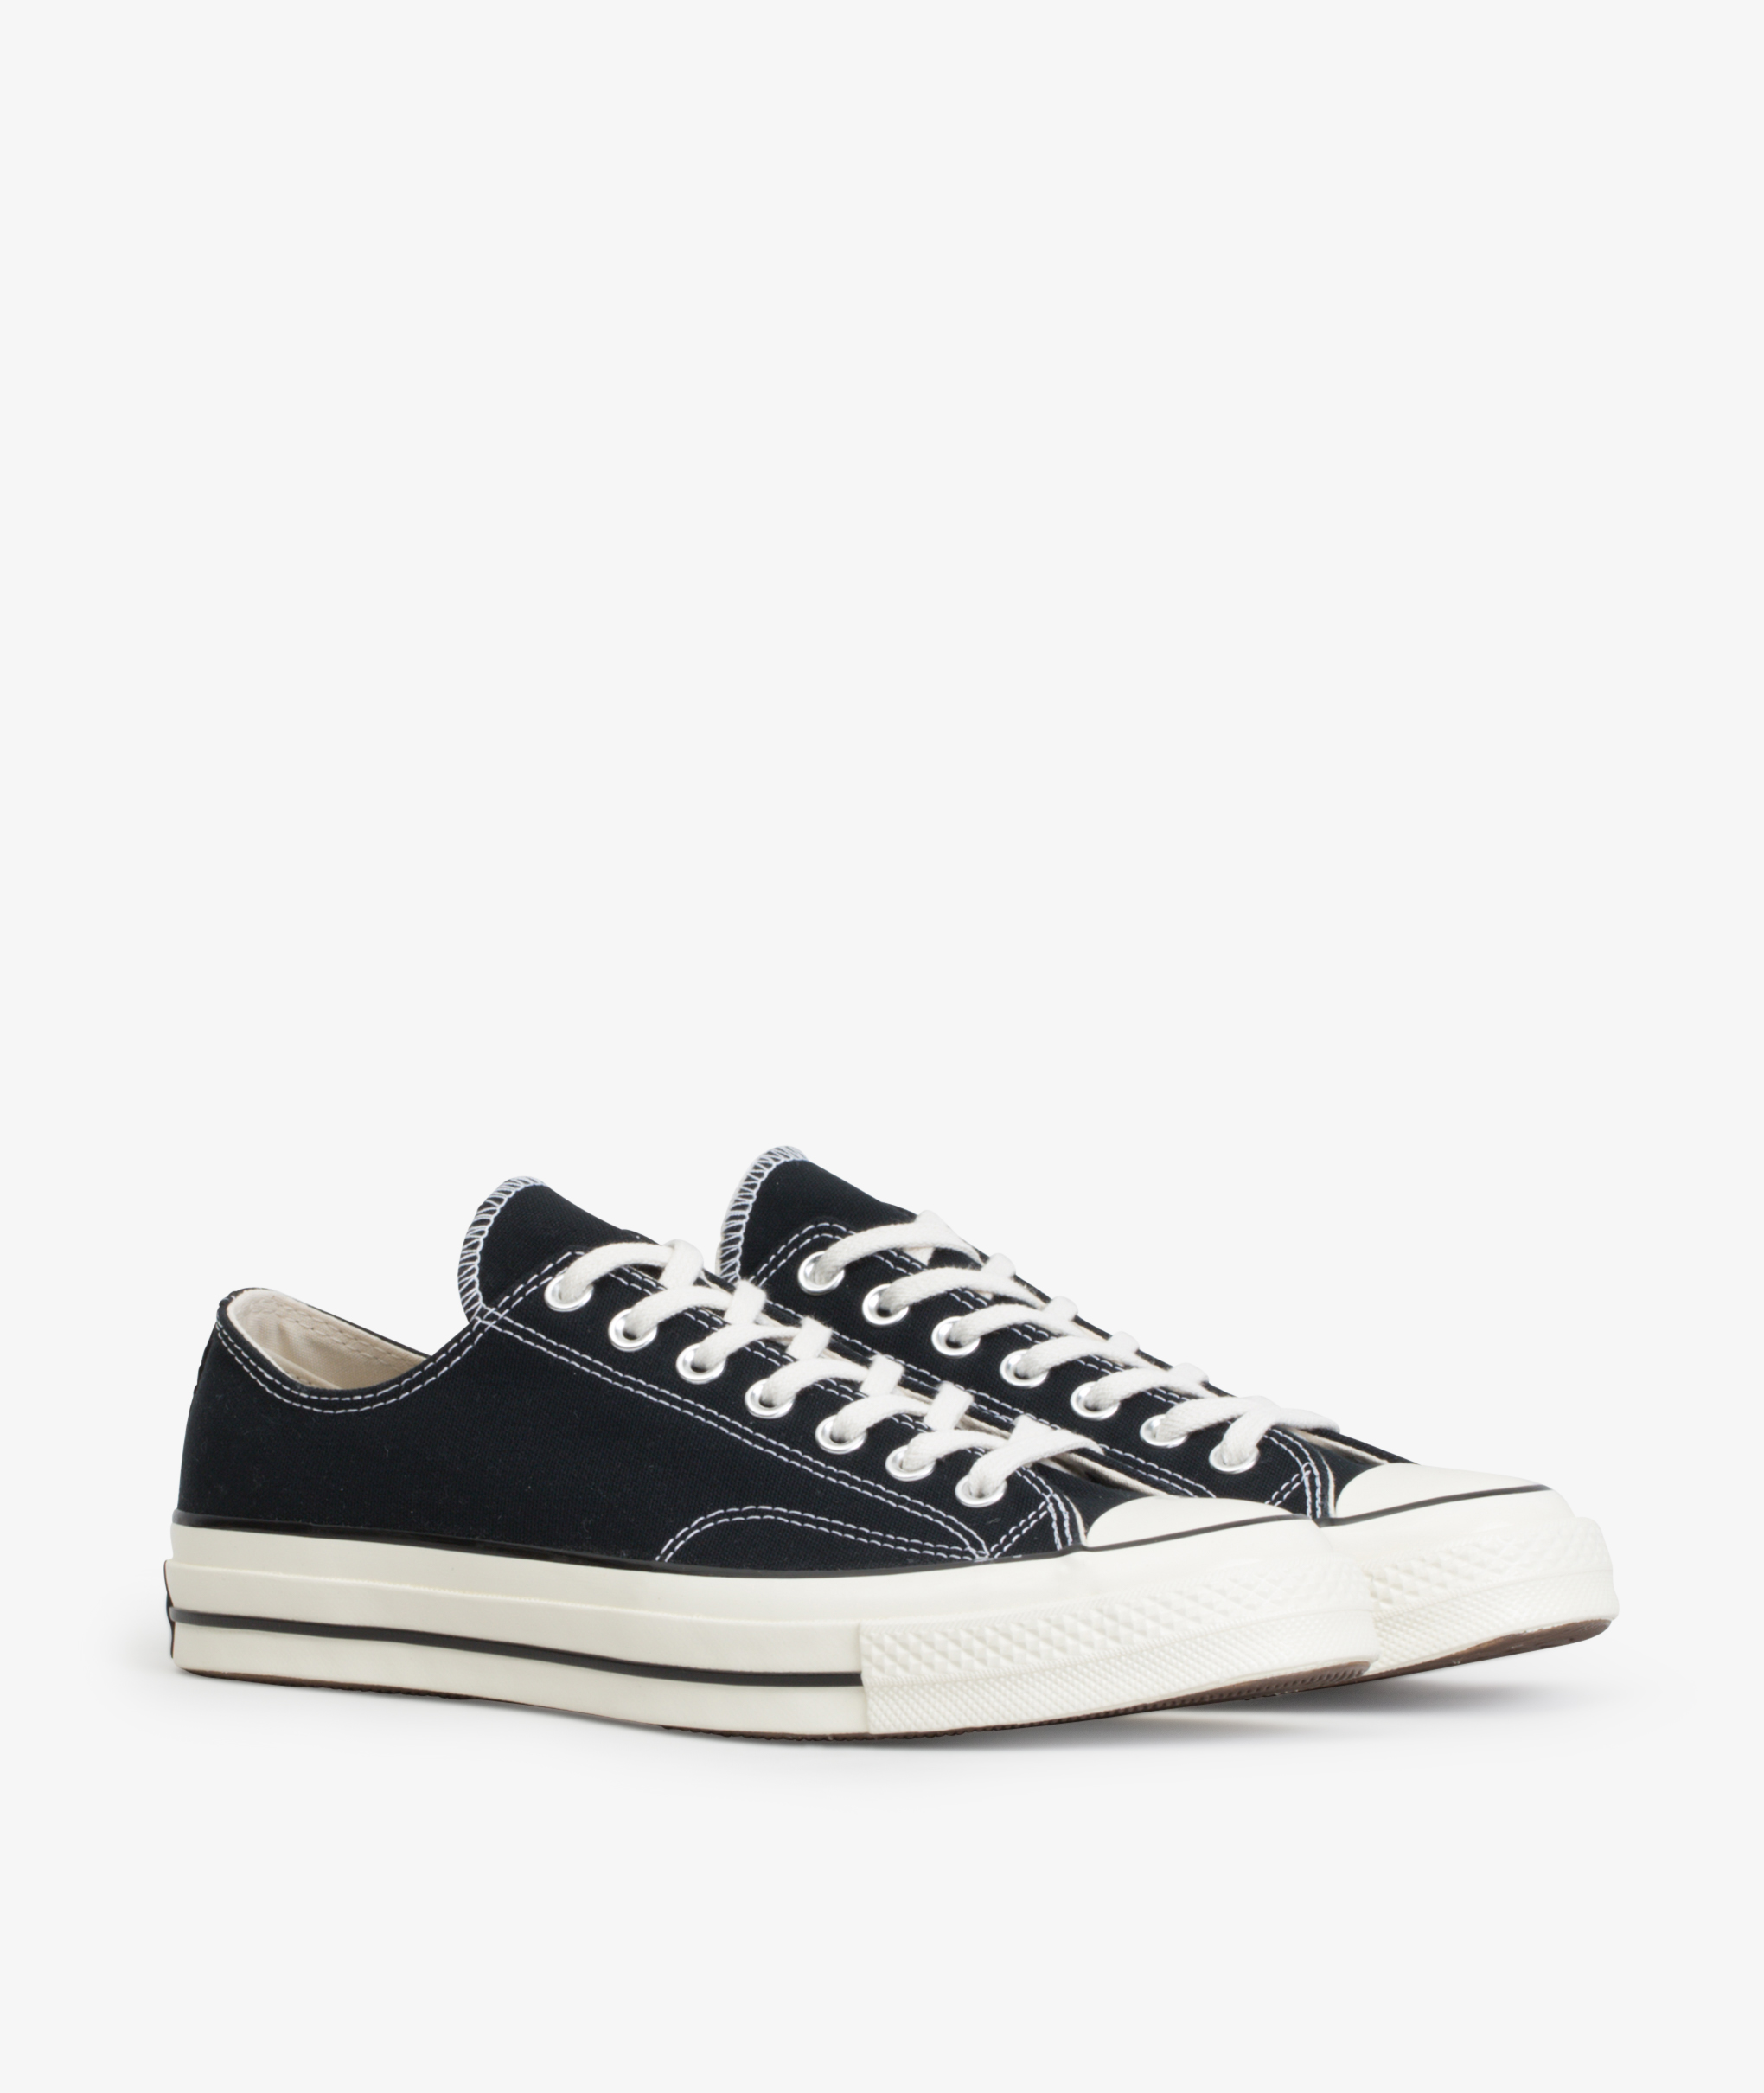 Norse Store | Shipping Worldwide - Converse All Star 70 OX